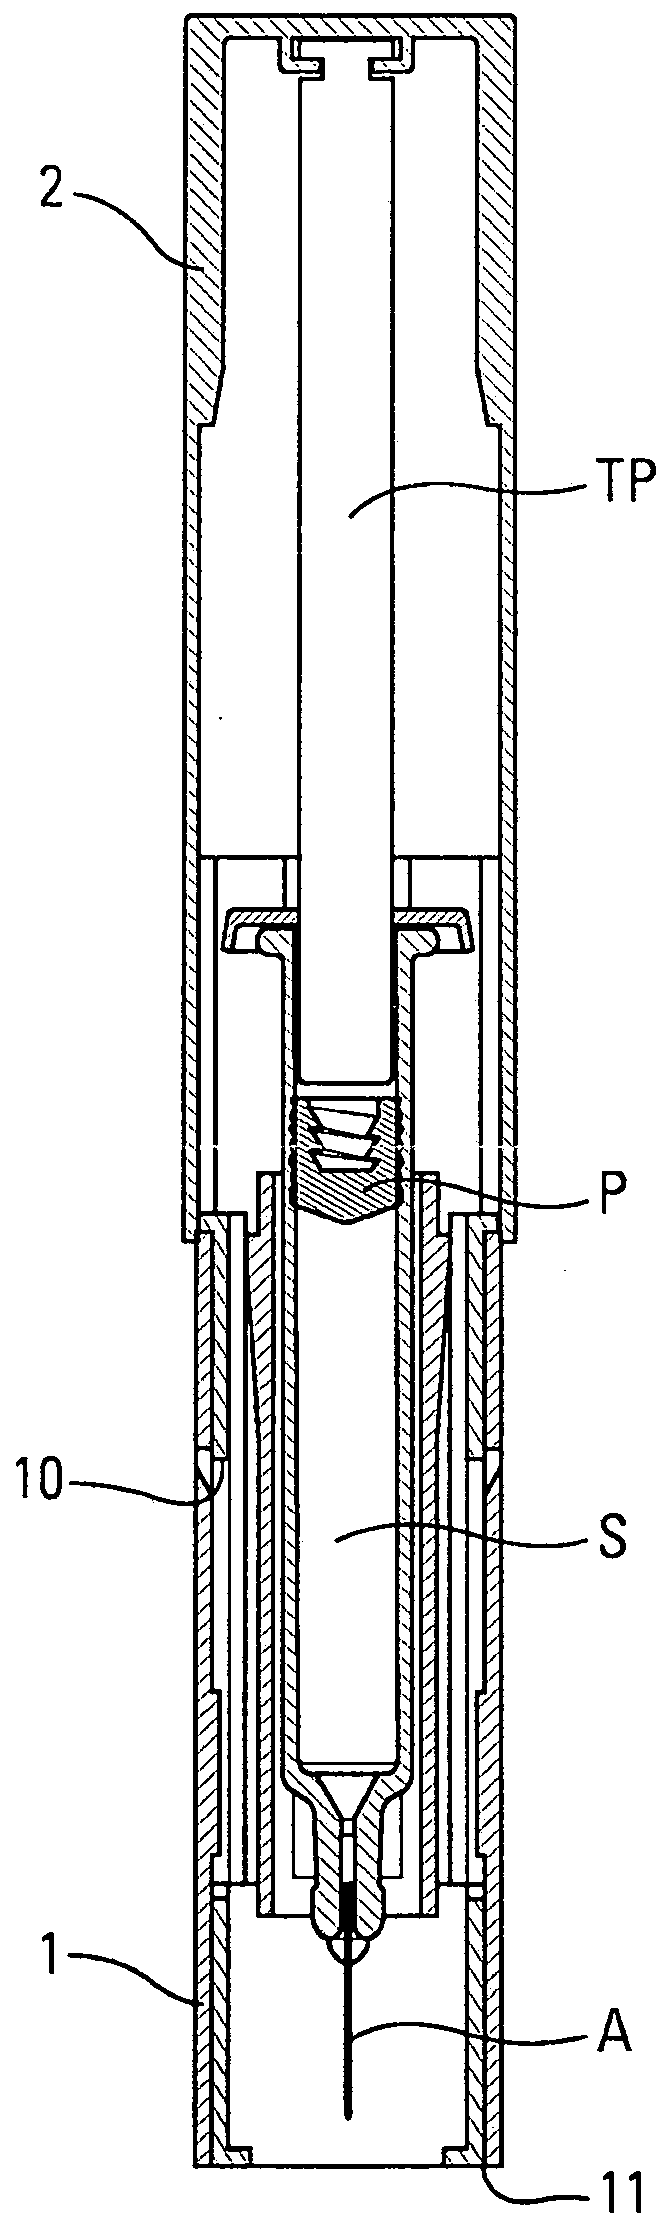 Manual injection device